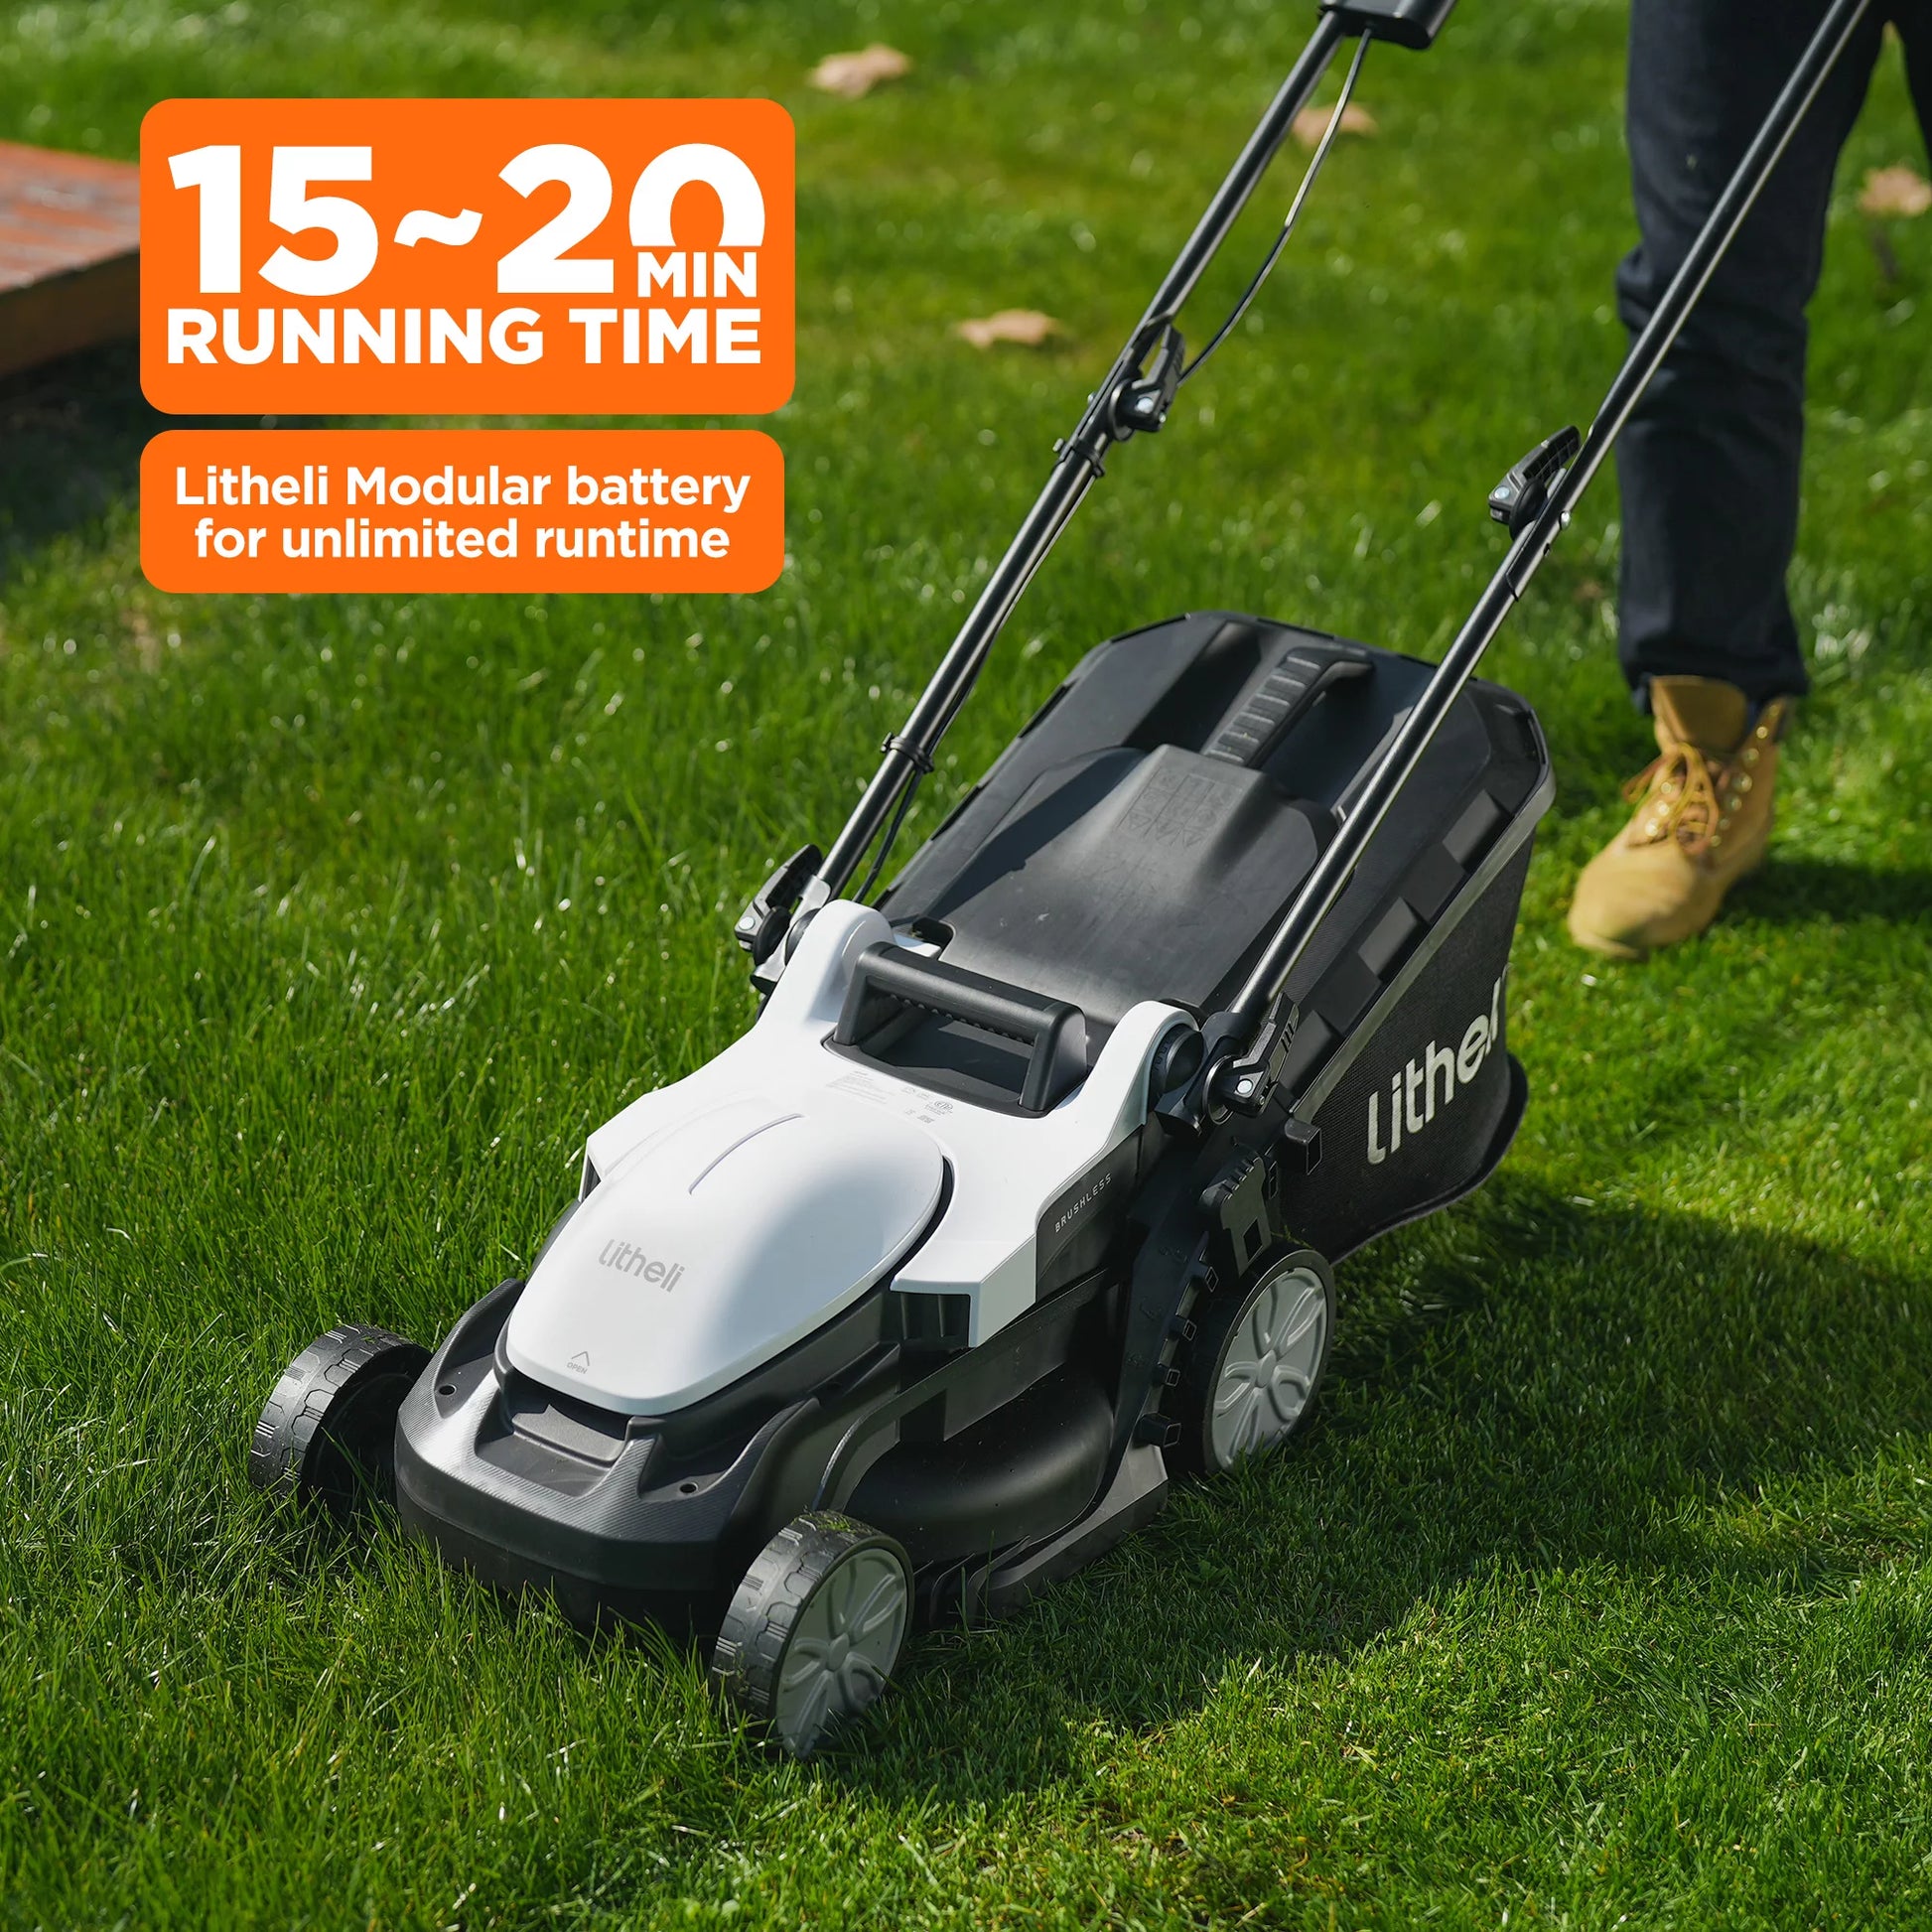 Cordless Lawn Mower 13 Inch, 5 Heights Adjustment, U20 Series 20V Electric Lawn Mowers for Garden with Brushless Motor, 4.0Ah Portable Battery Included